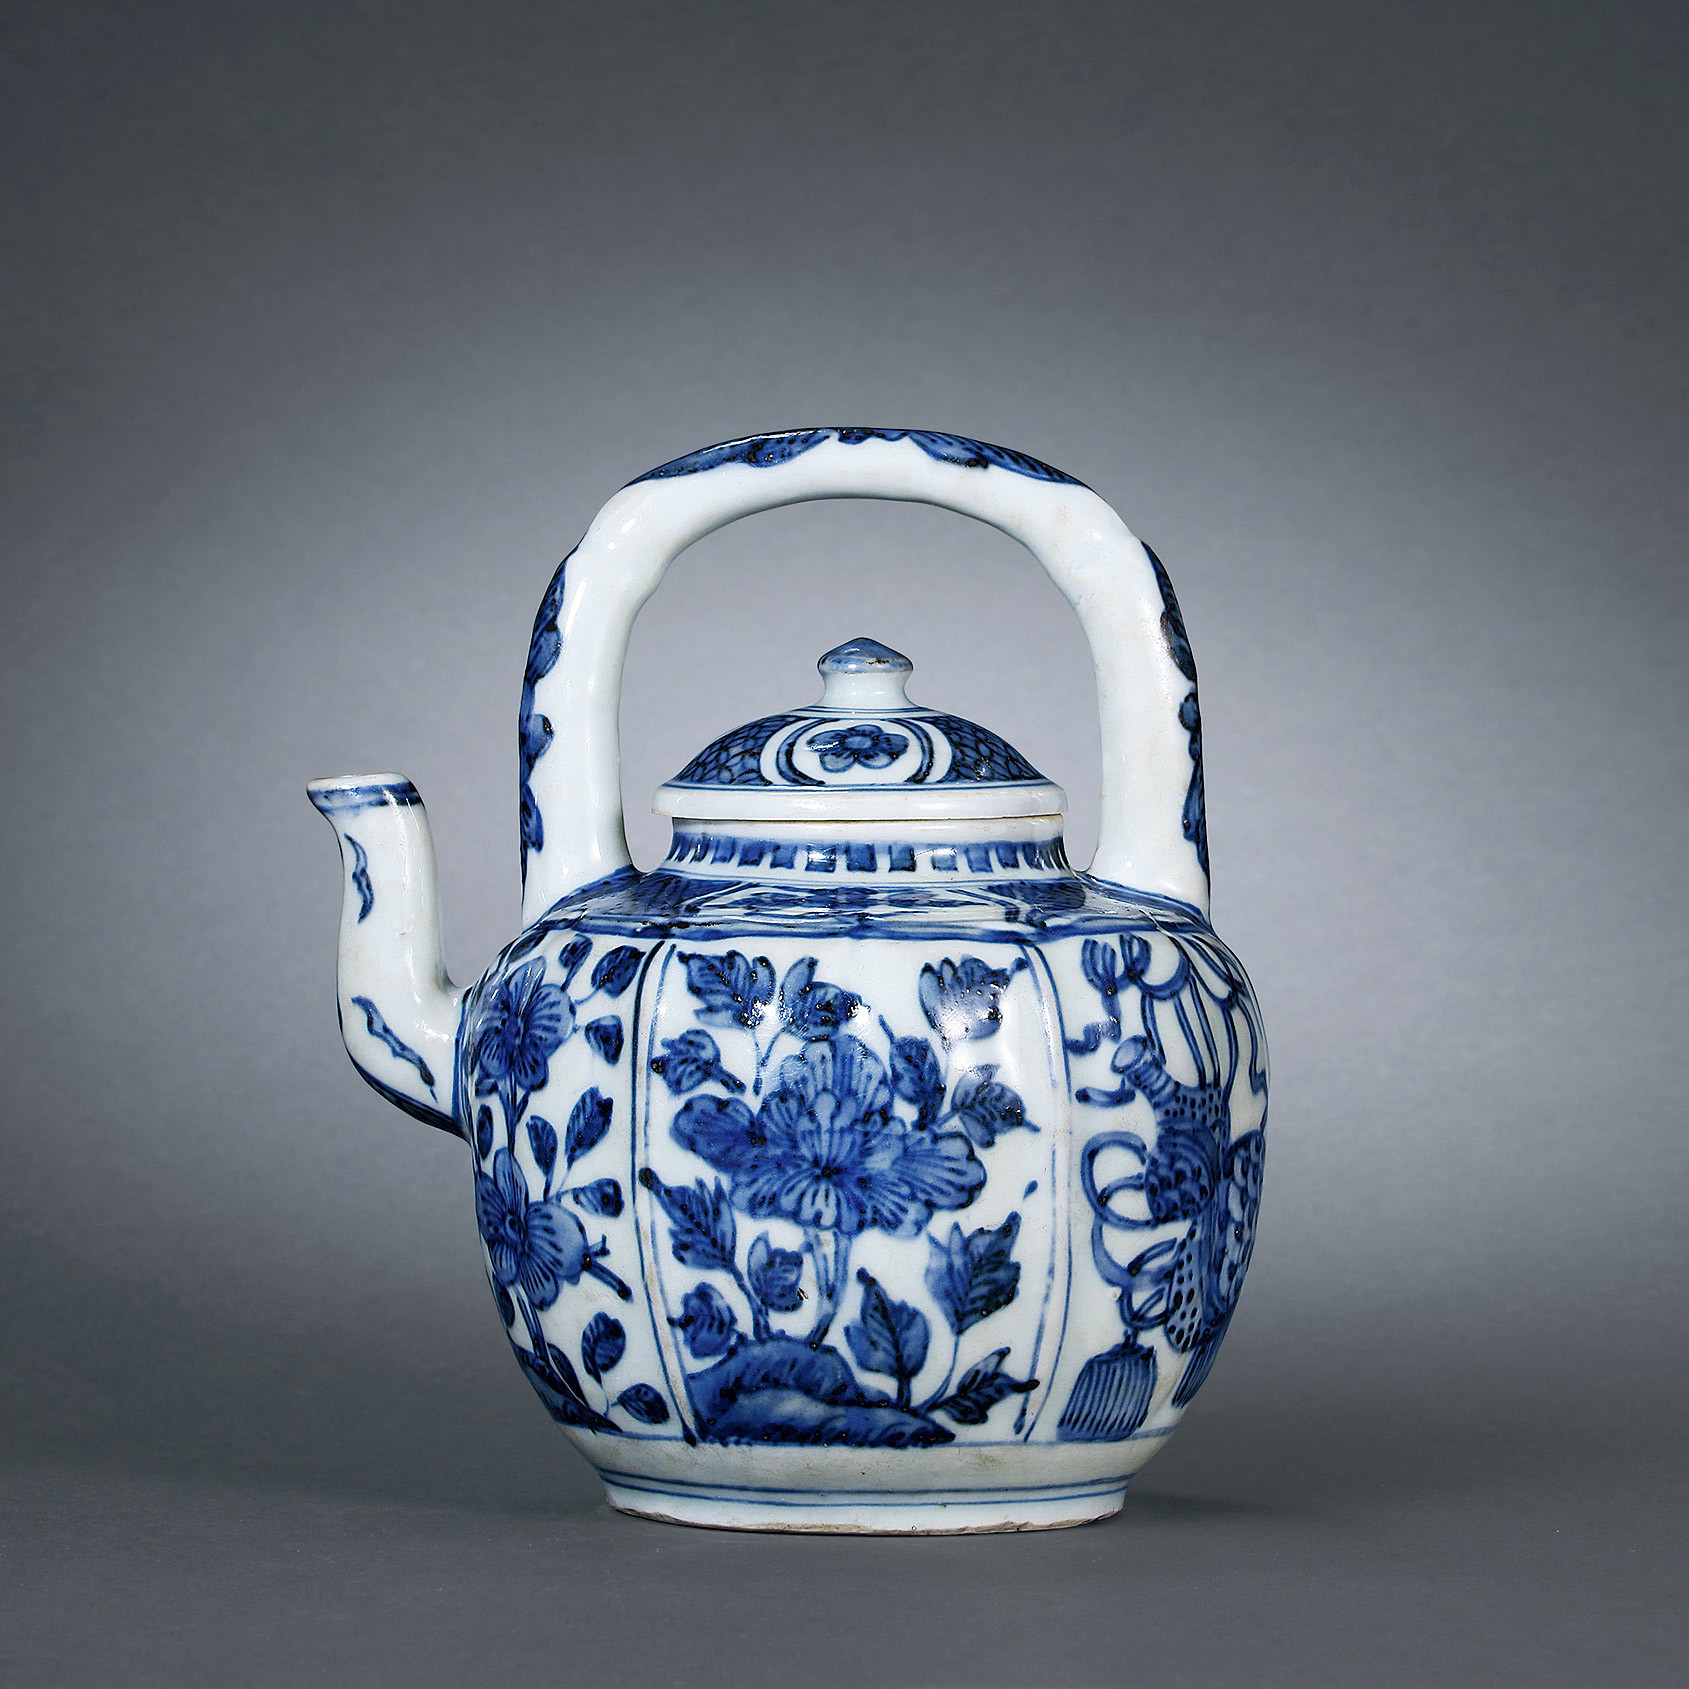 A BLUE AND WHITE‘FLOWERS’ HANDLE KETTLE